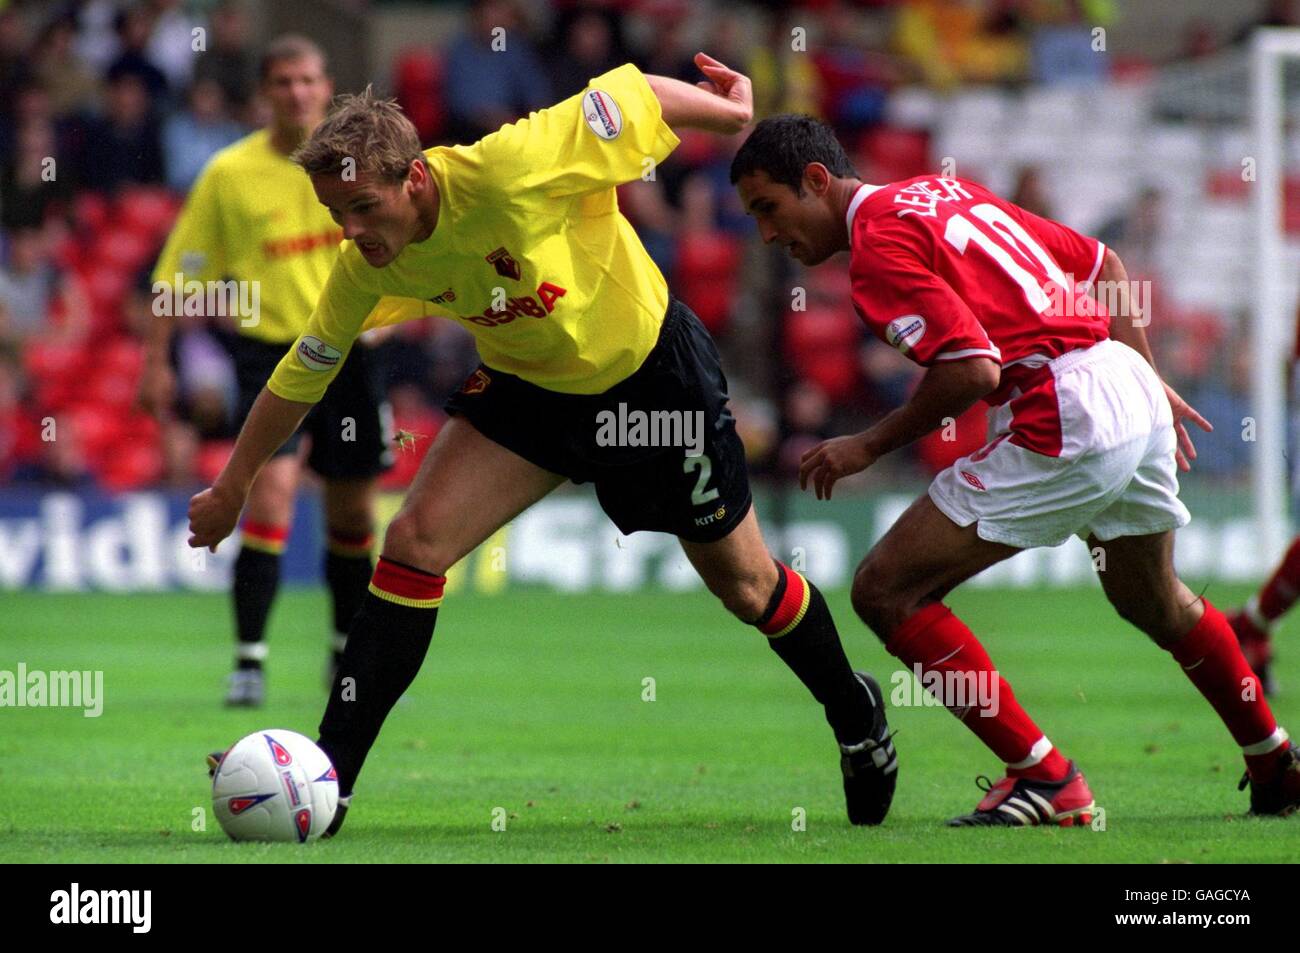 Soccer - Nationwide League Division One - Nottingham Forest v Watford. Watford's Neal Ardley battles for the ball with Nottingham Forest's Jack Lester Stock Photo